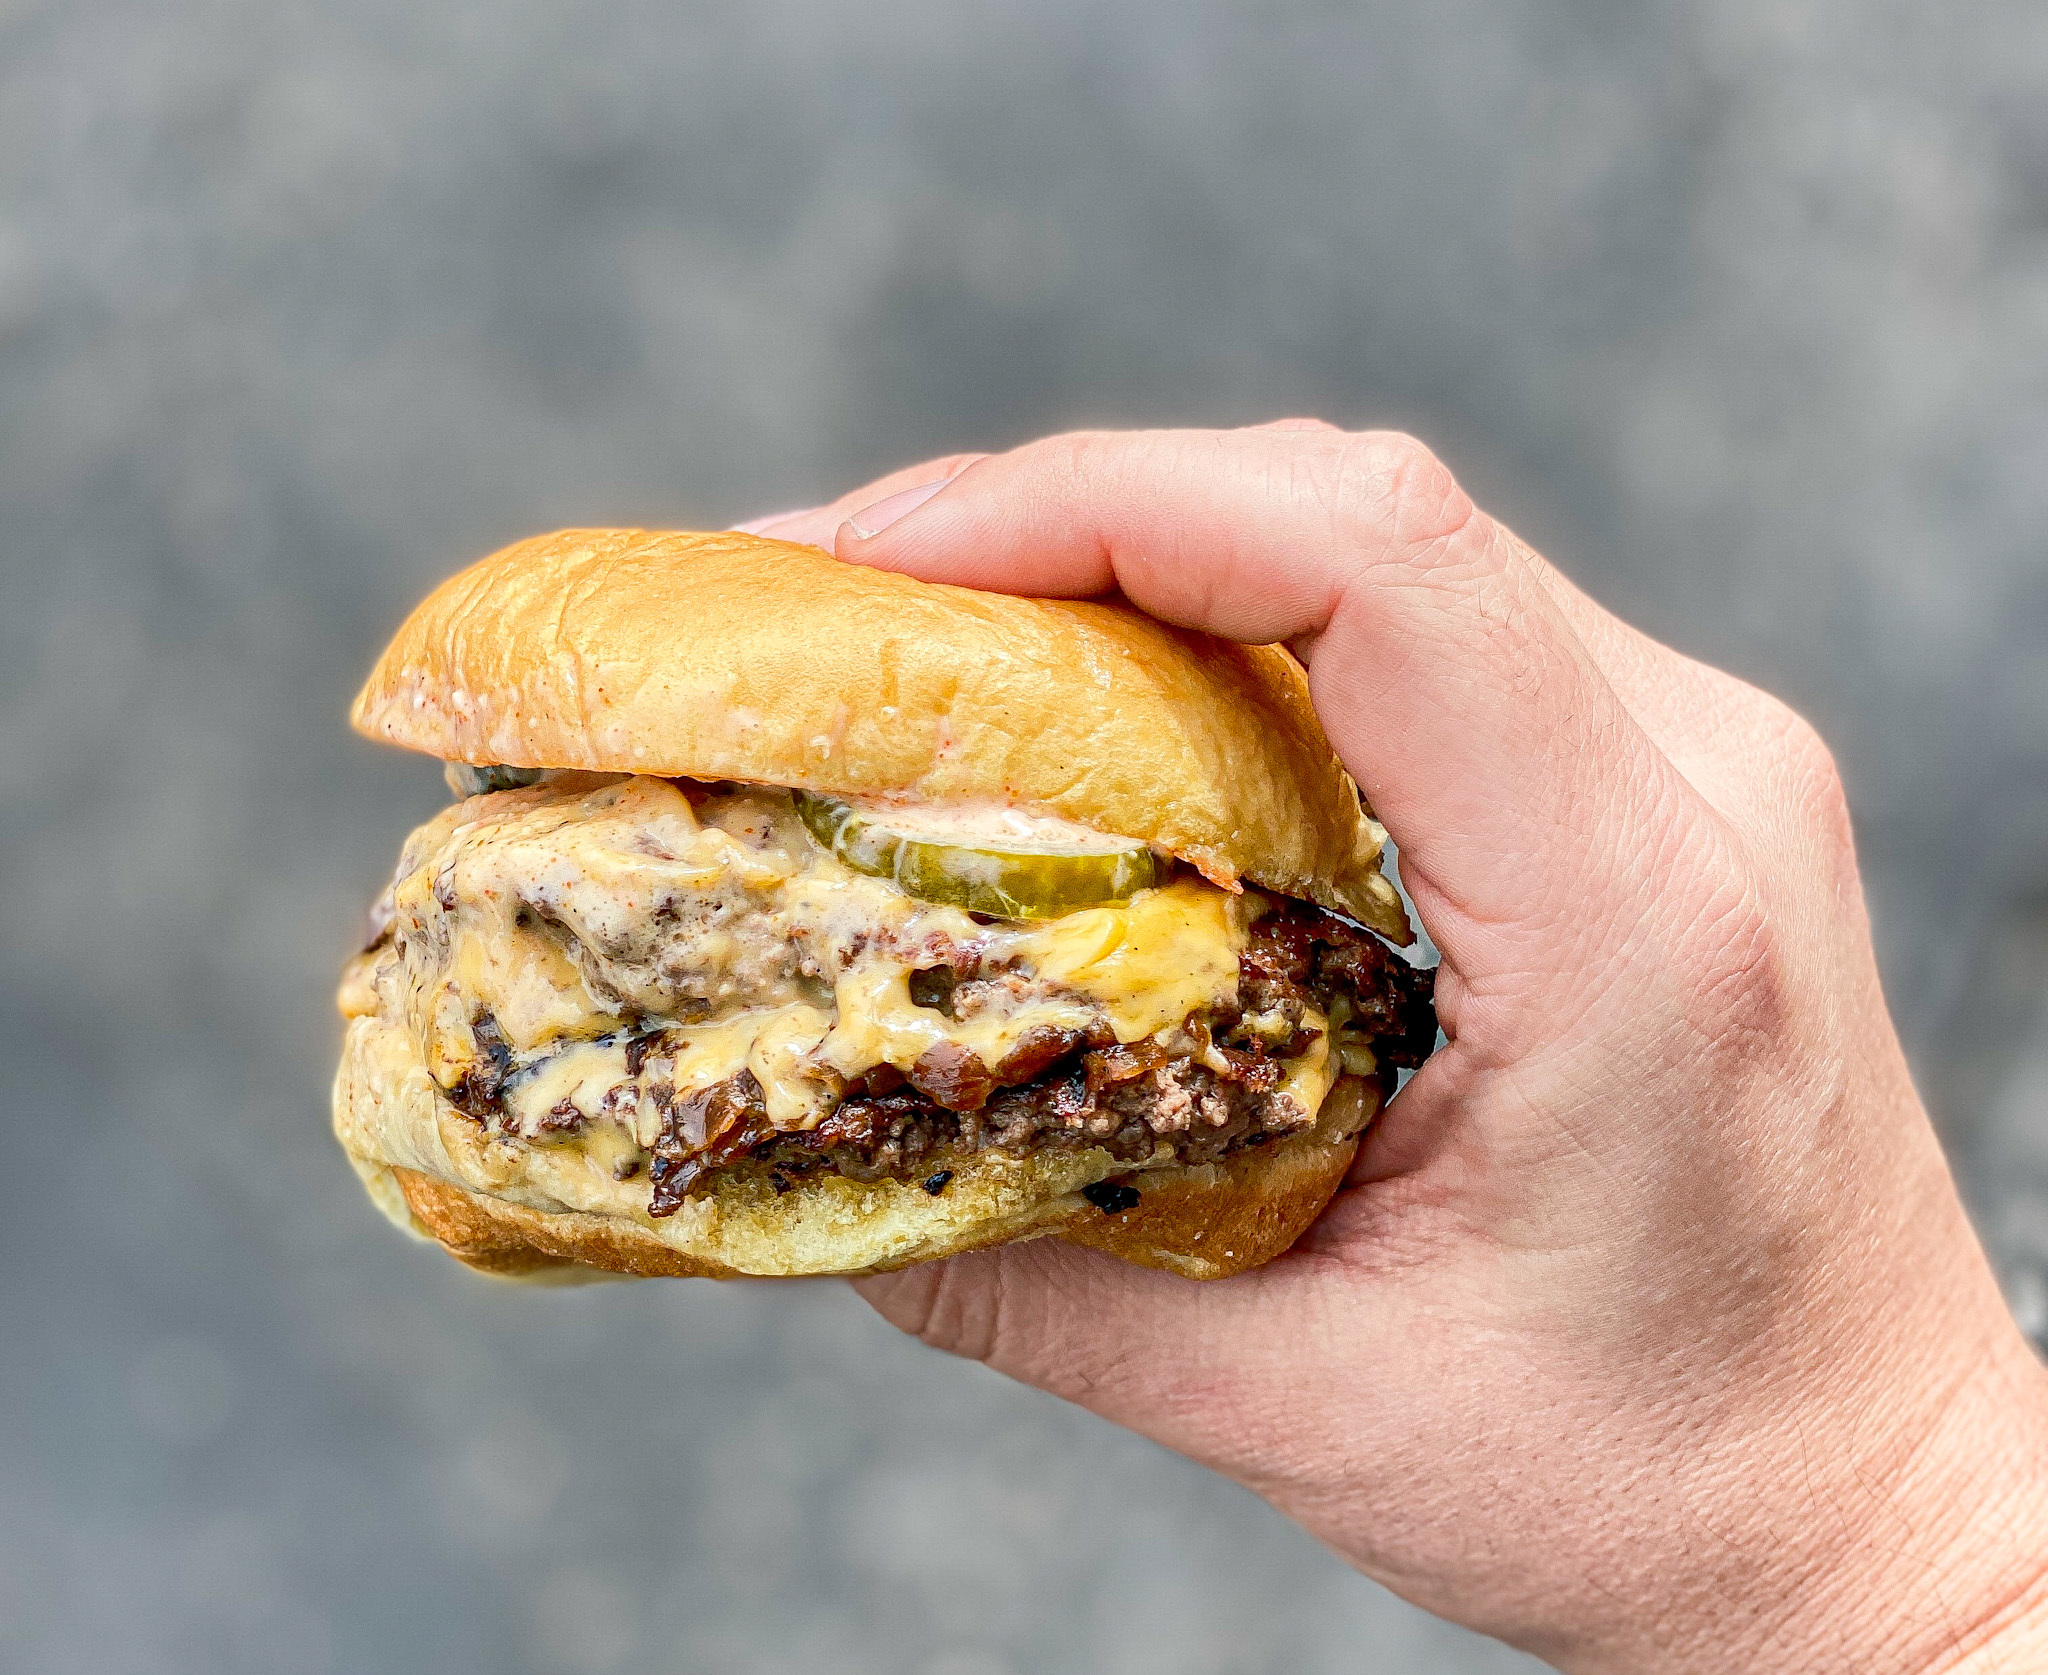 A hand grips a cheesy double patty burger.